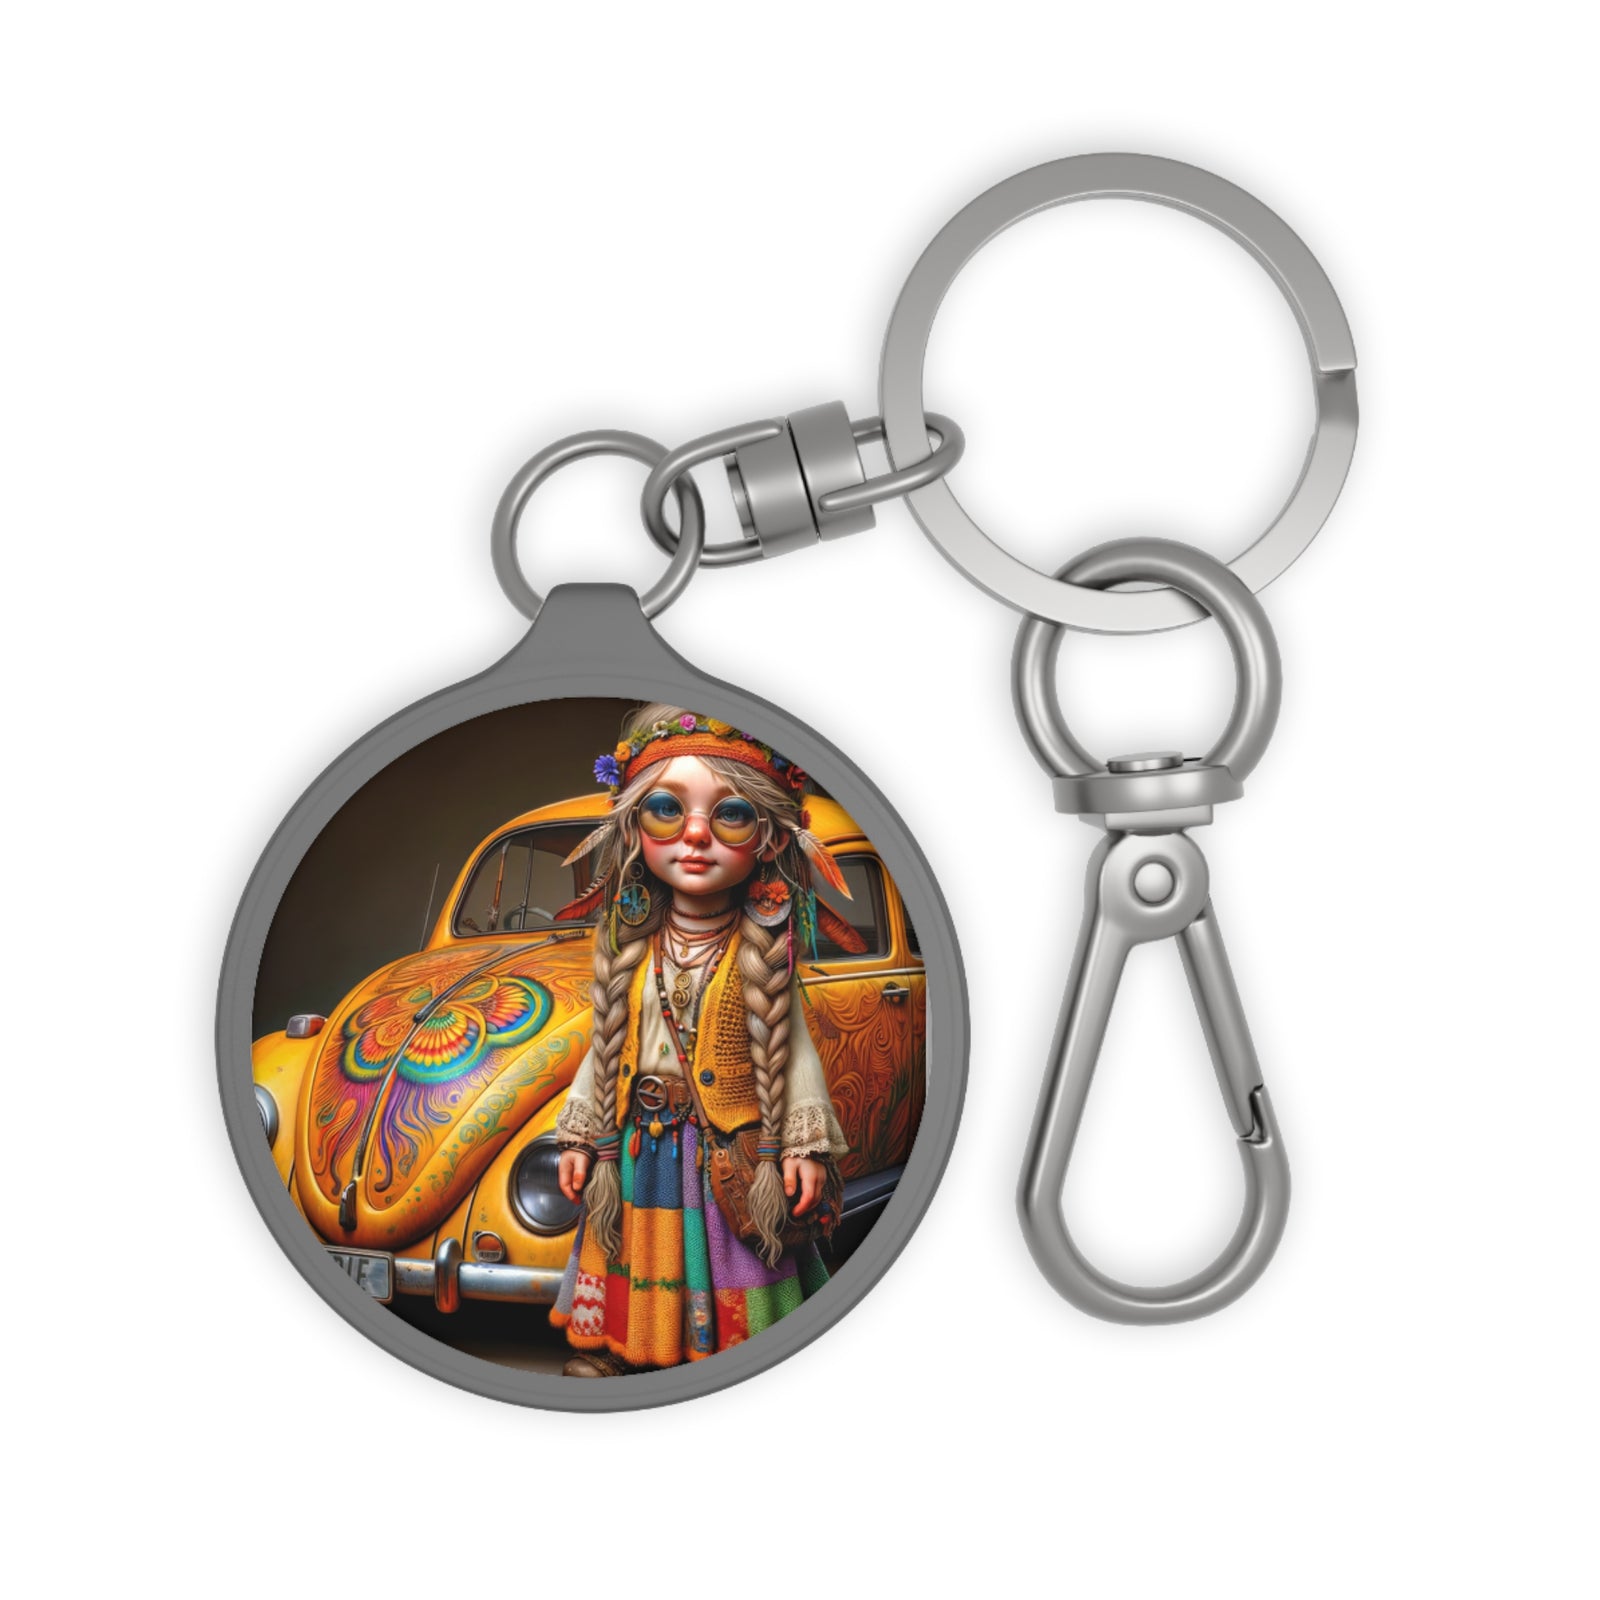 The Hippie Sprite and Her Psychedelic Steed Keyring Tag